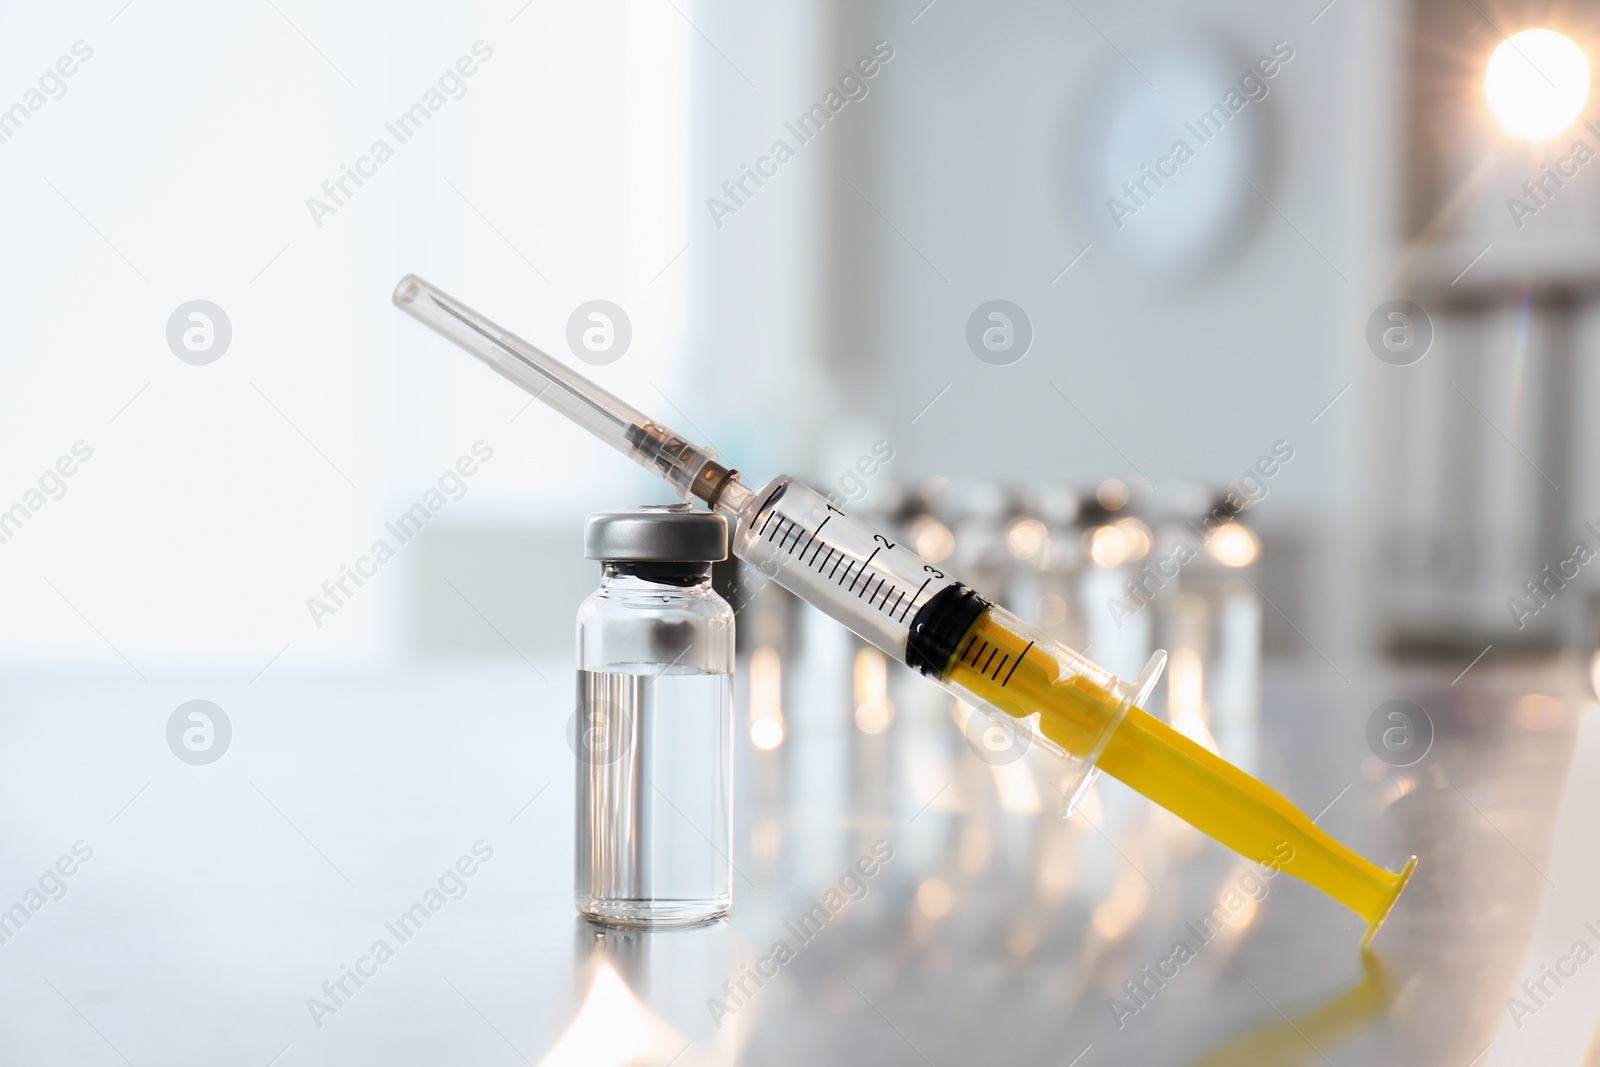 Photo of Syringe with vial of medicine on table